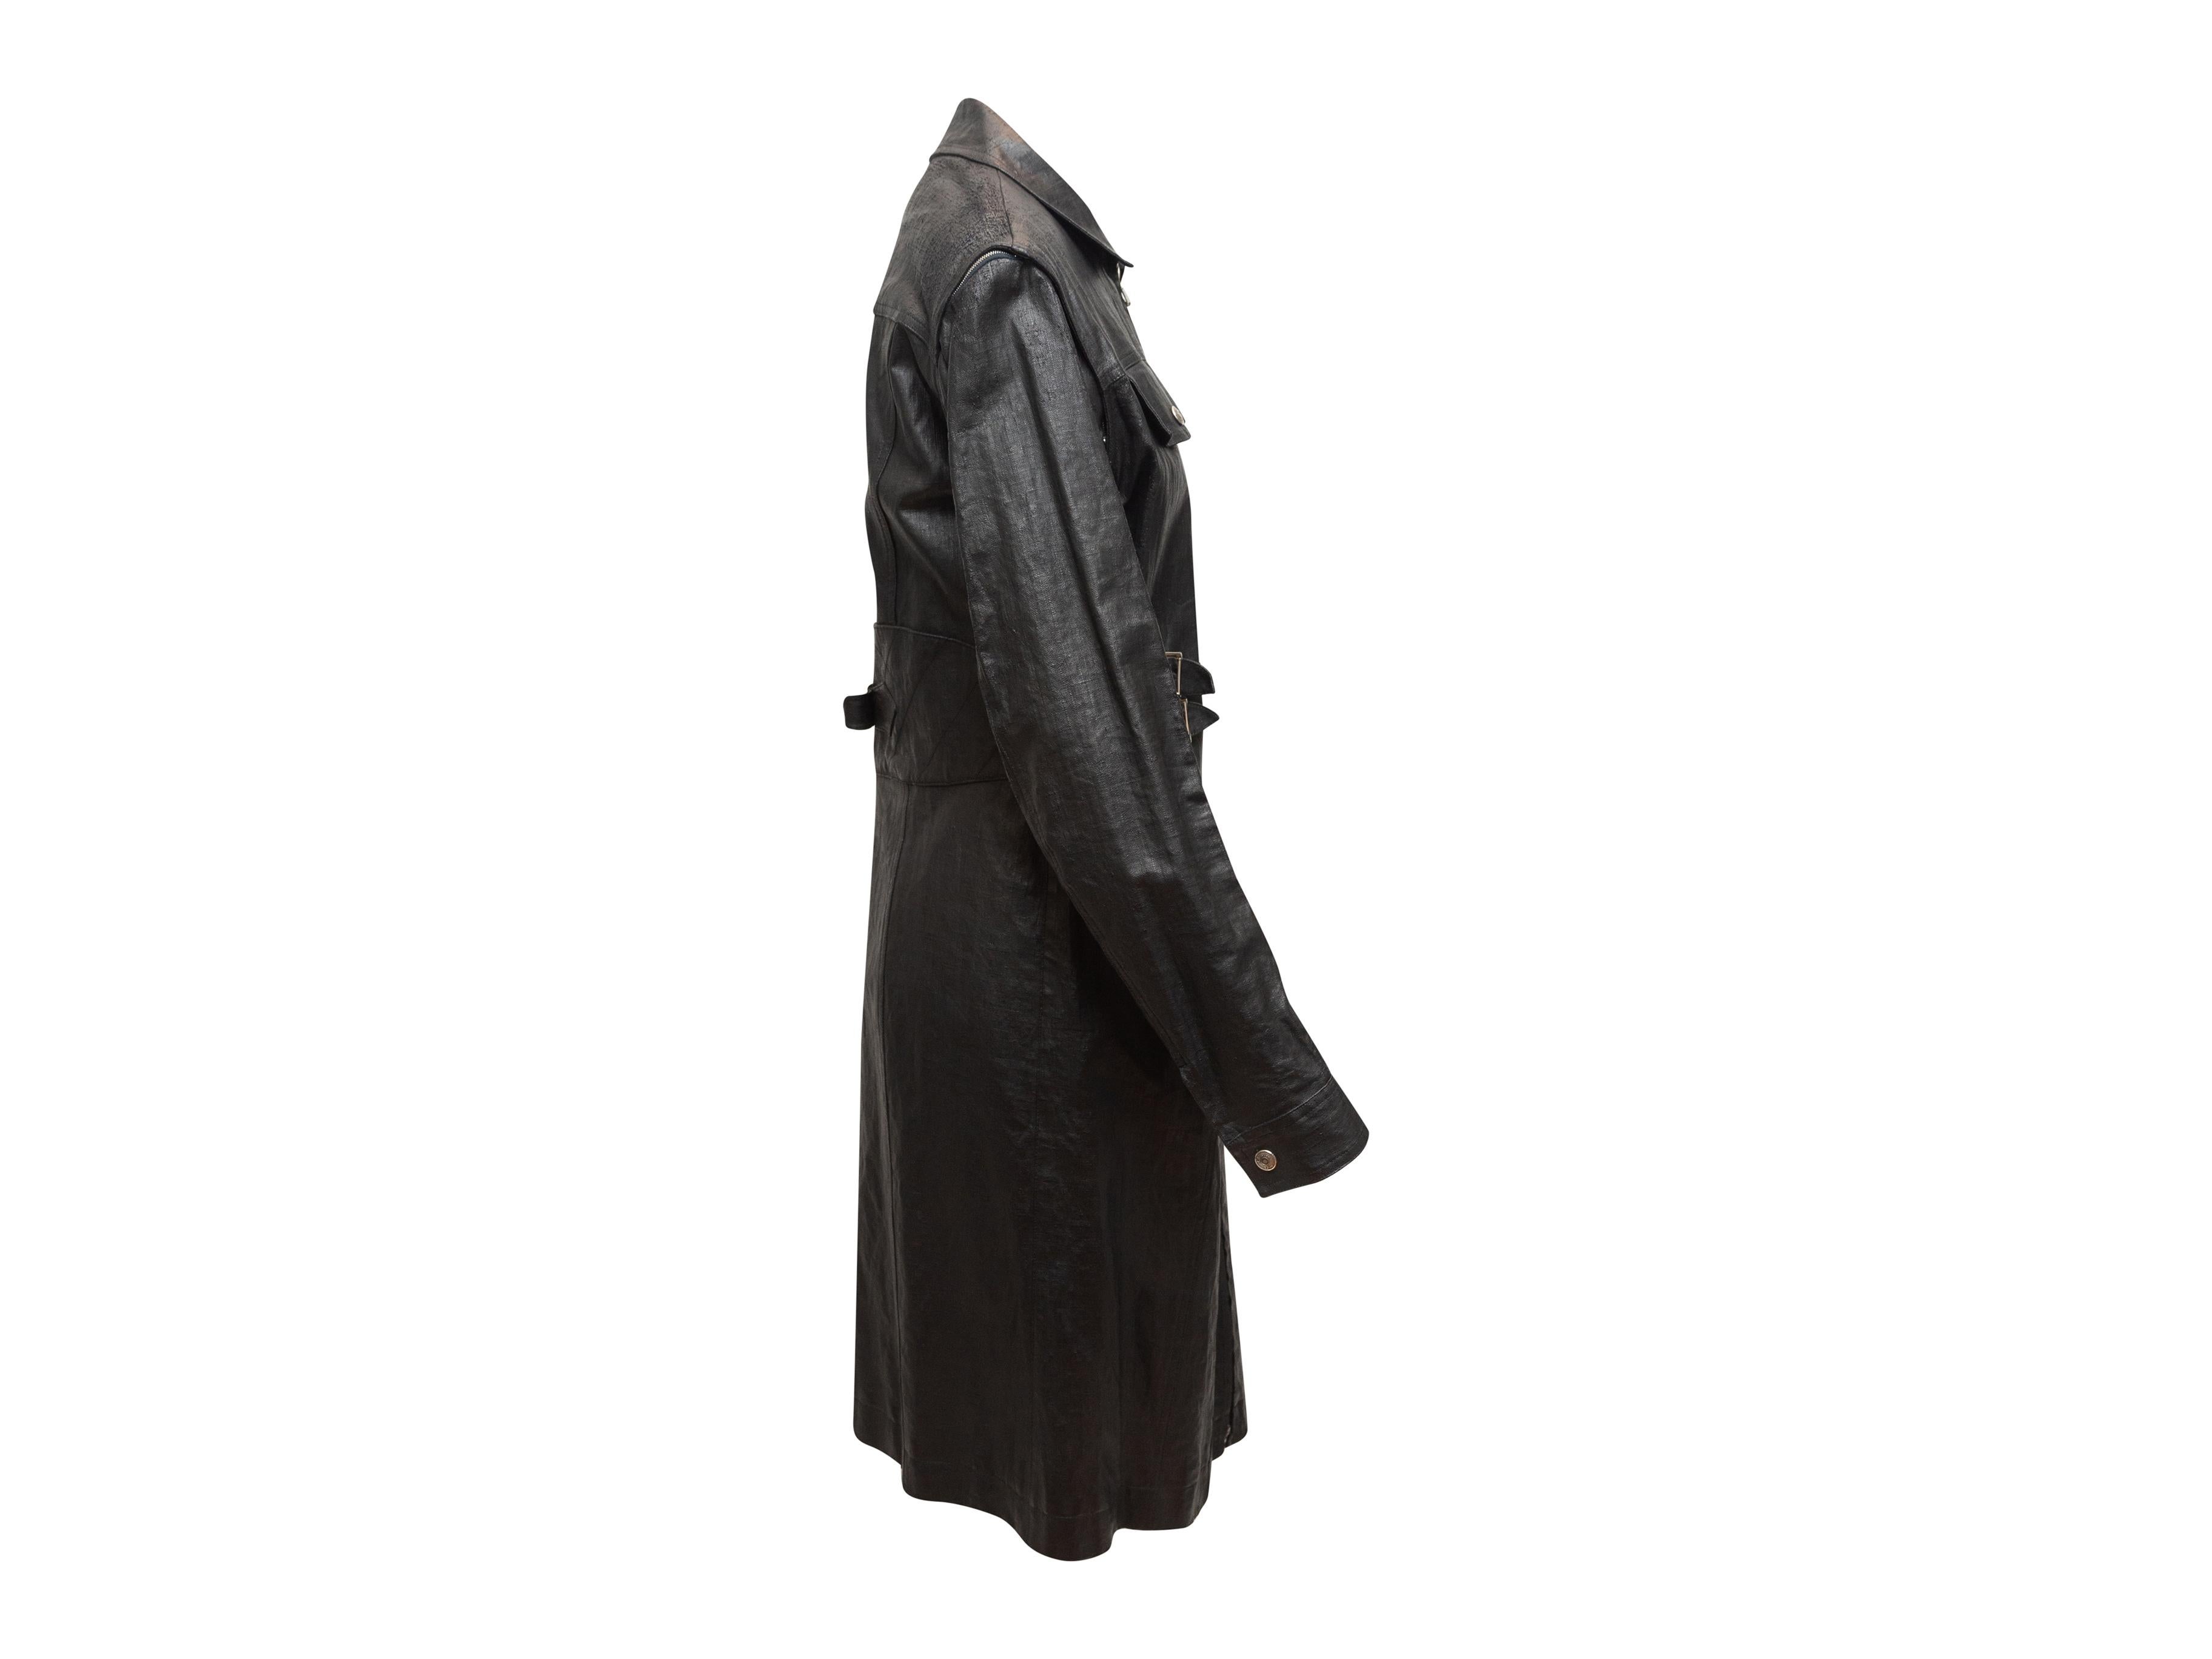 Product details: Black long waxed coat by Christian Dior. From the John Galliano Era. Pointed collar. Dual flap pockets at bust. Buckle accents at waist sides. Dual hip pockets. Zip-off sleeves. Zip closure at center front. 36